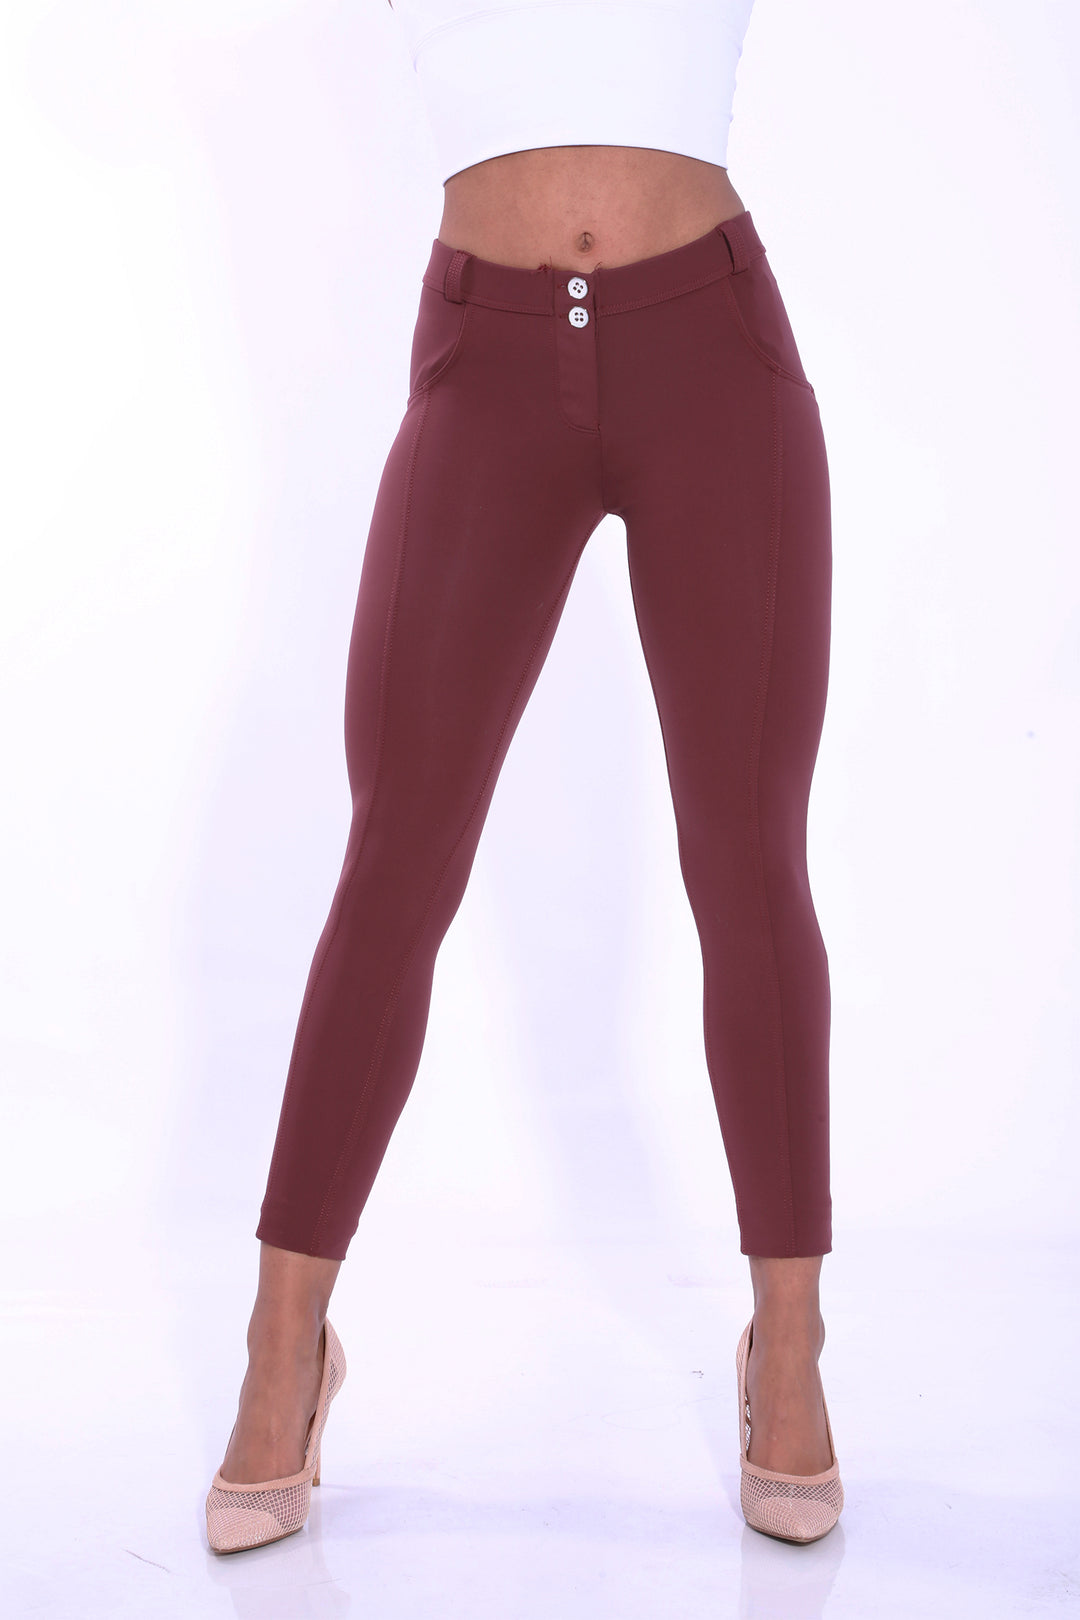 Low waist hipster Butt lifting shaping leggings -  Silky soft Spandex Maroonaos-init aos-animate